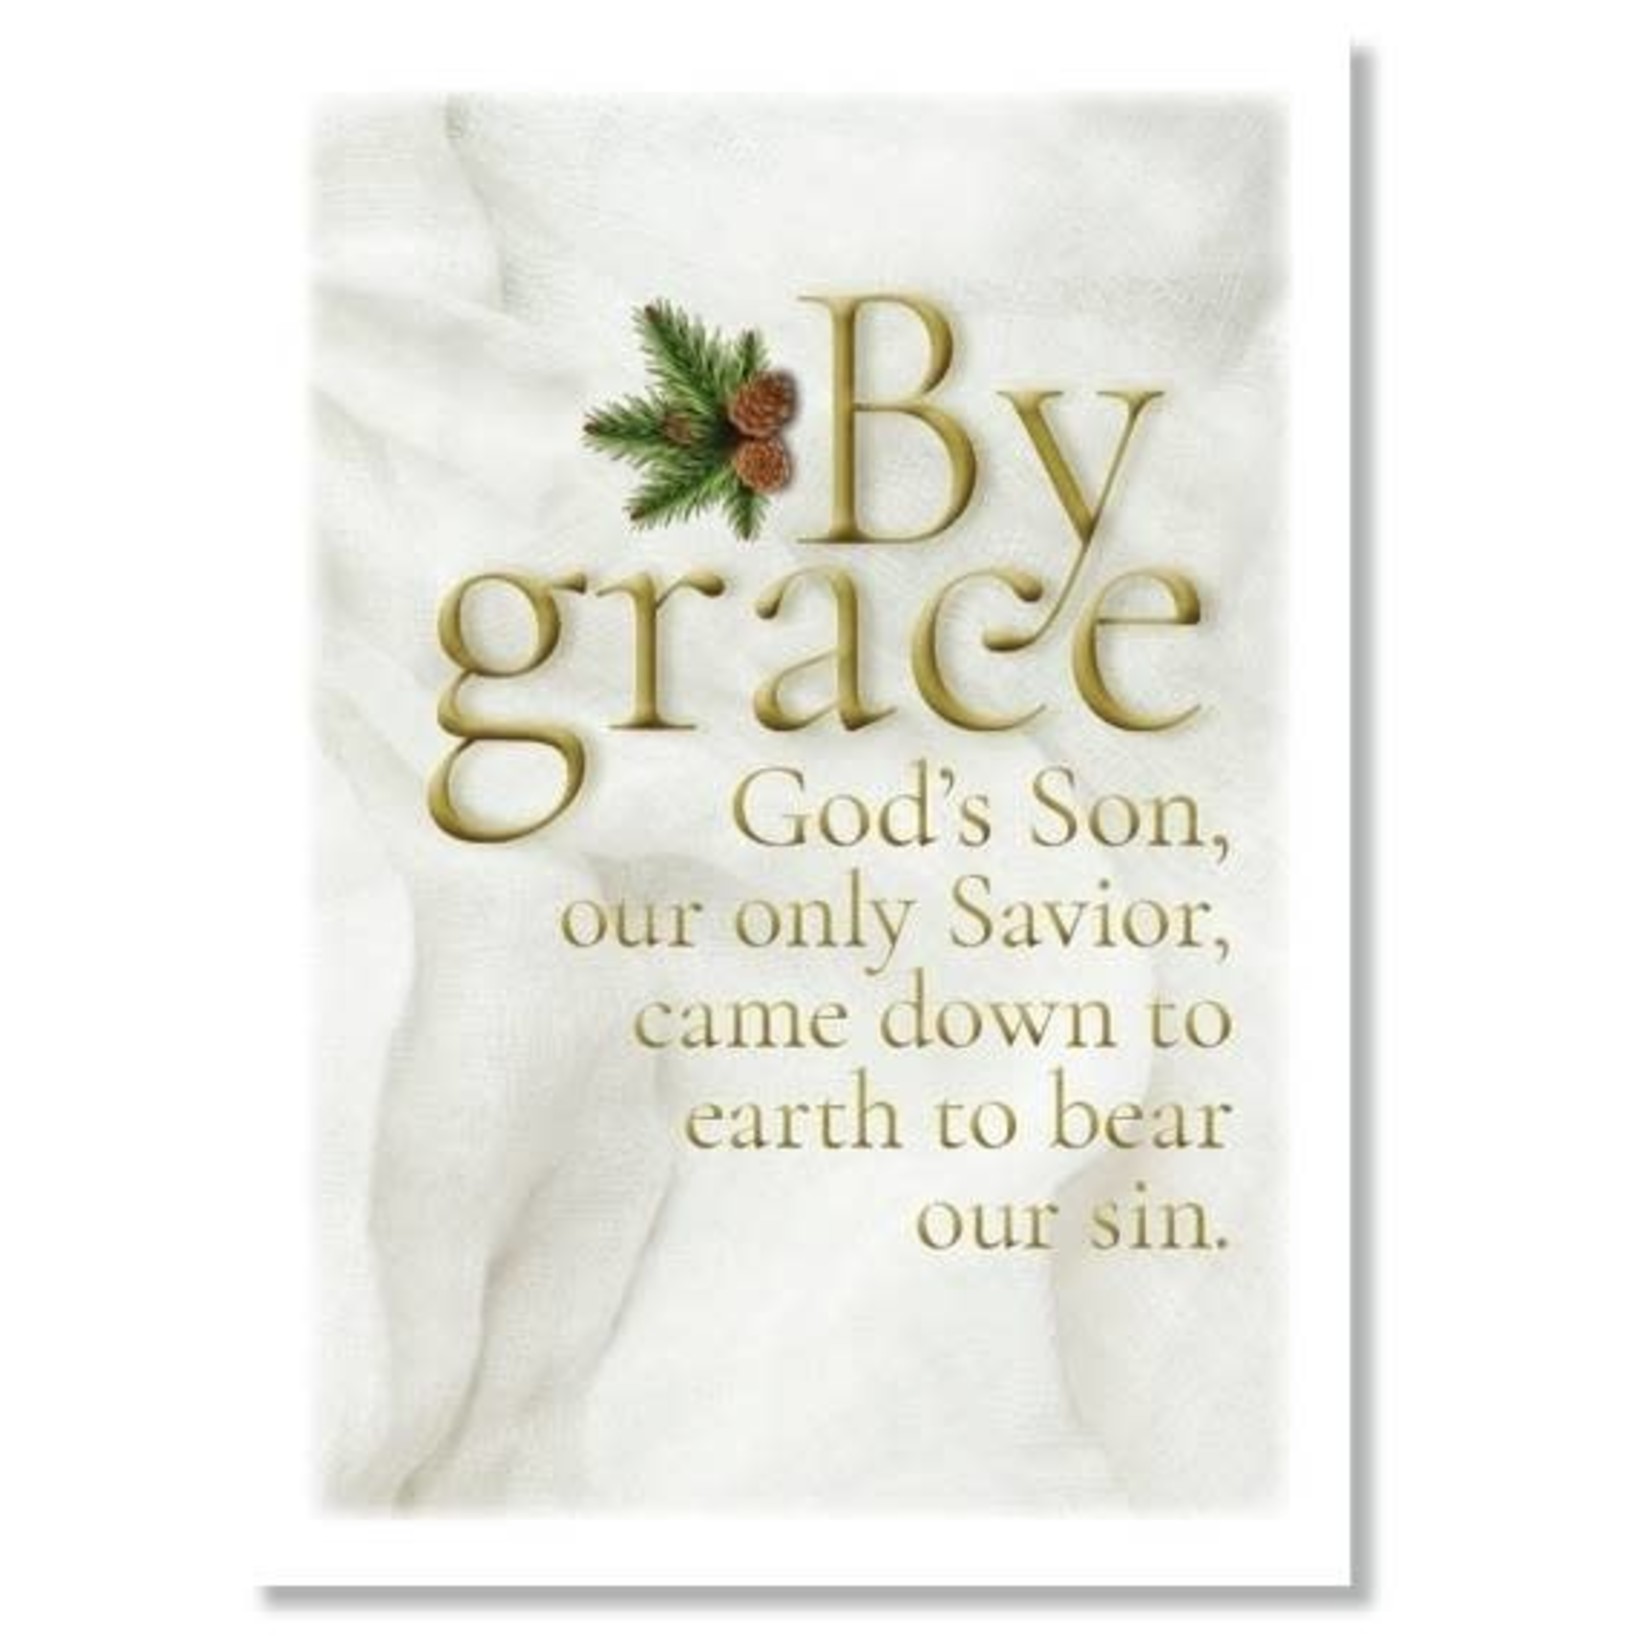 Hymns In My Heart - 5x7" Greeting Card - Christmas - By Grace God's Son